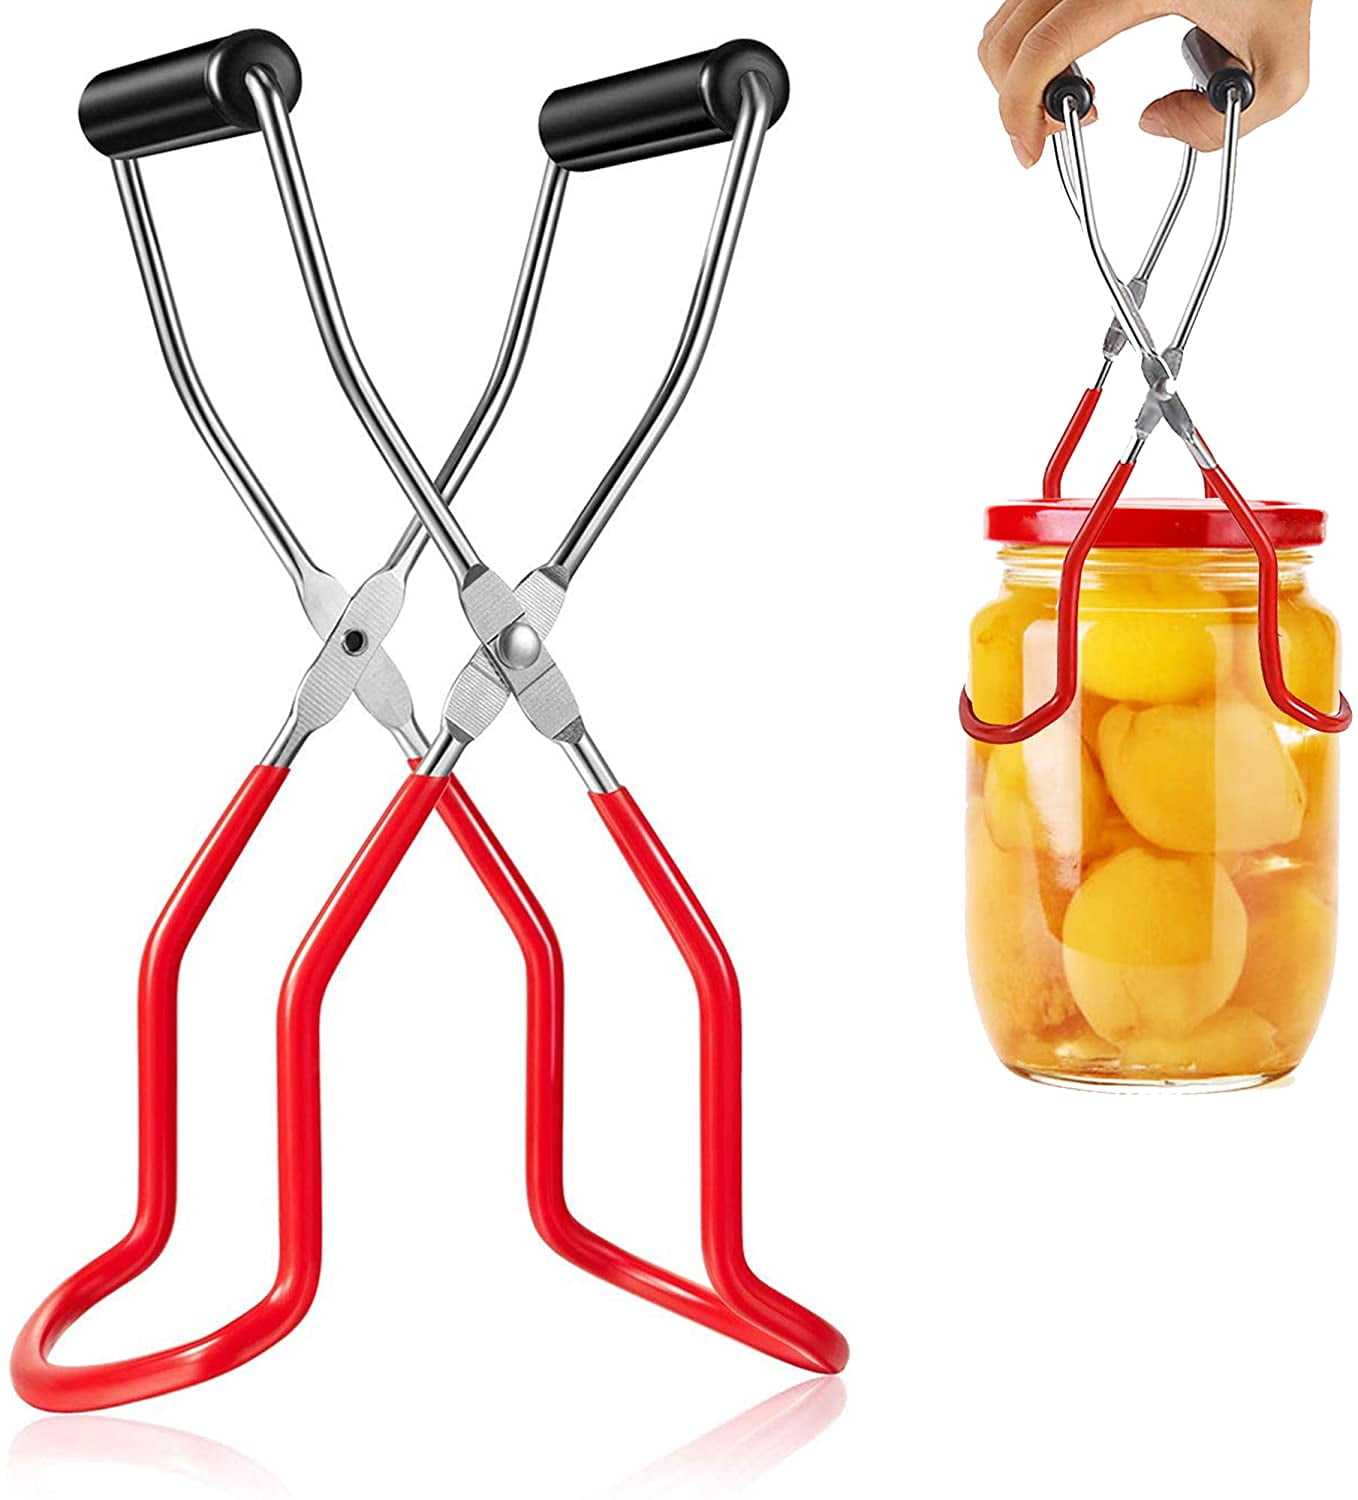 Horuhue Canning Jar Lifter Stainless Steel Jar Lifter Tongs with Rubber Grips Anti-Slip Canning Tongs for Kitchen Restaurant